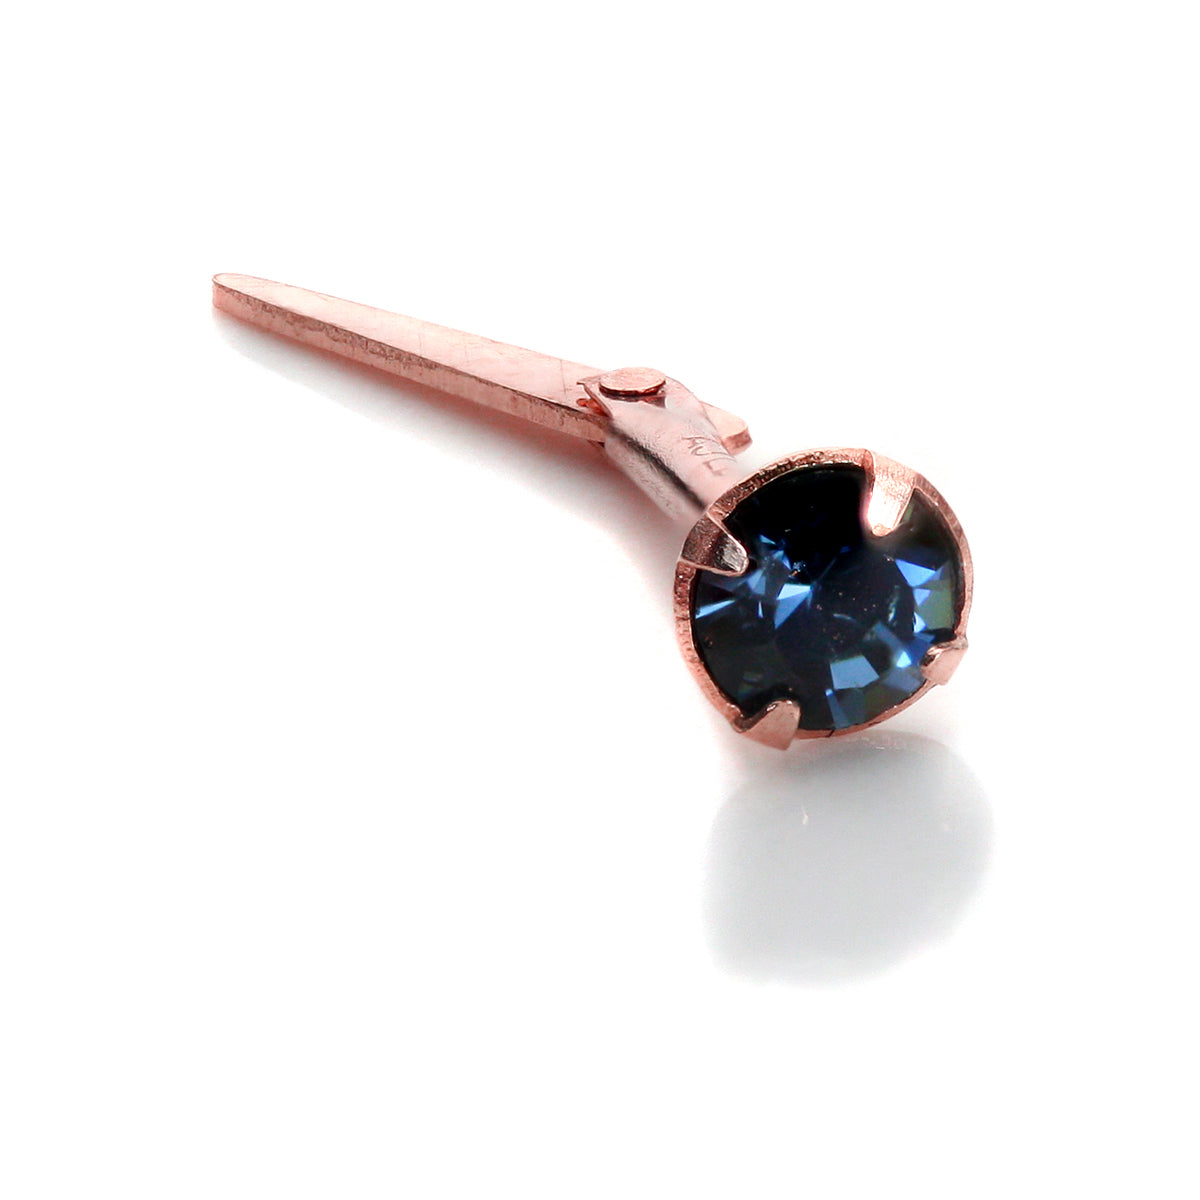 9ct Rose Gold Andralok 18Ga Nose Stud with 3mm CZ Crystal - 5 Colours